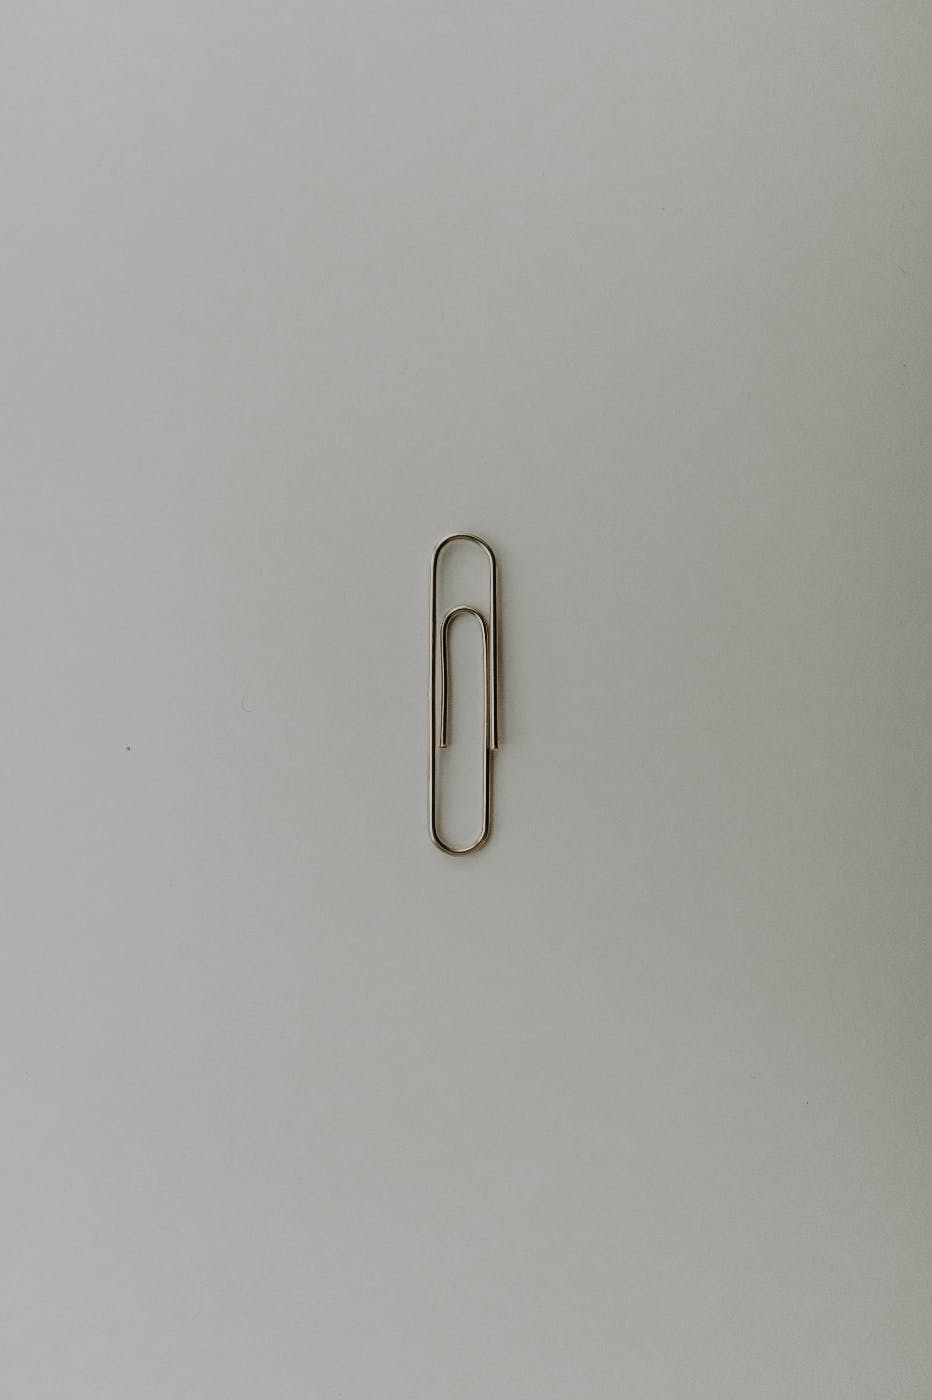 a single paper clip on a gray background